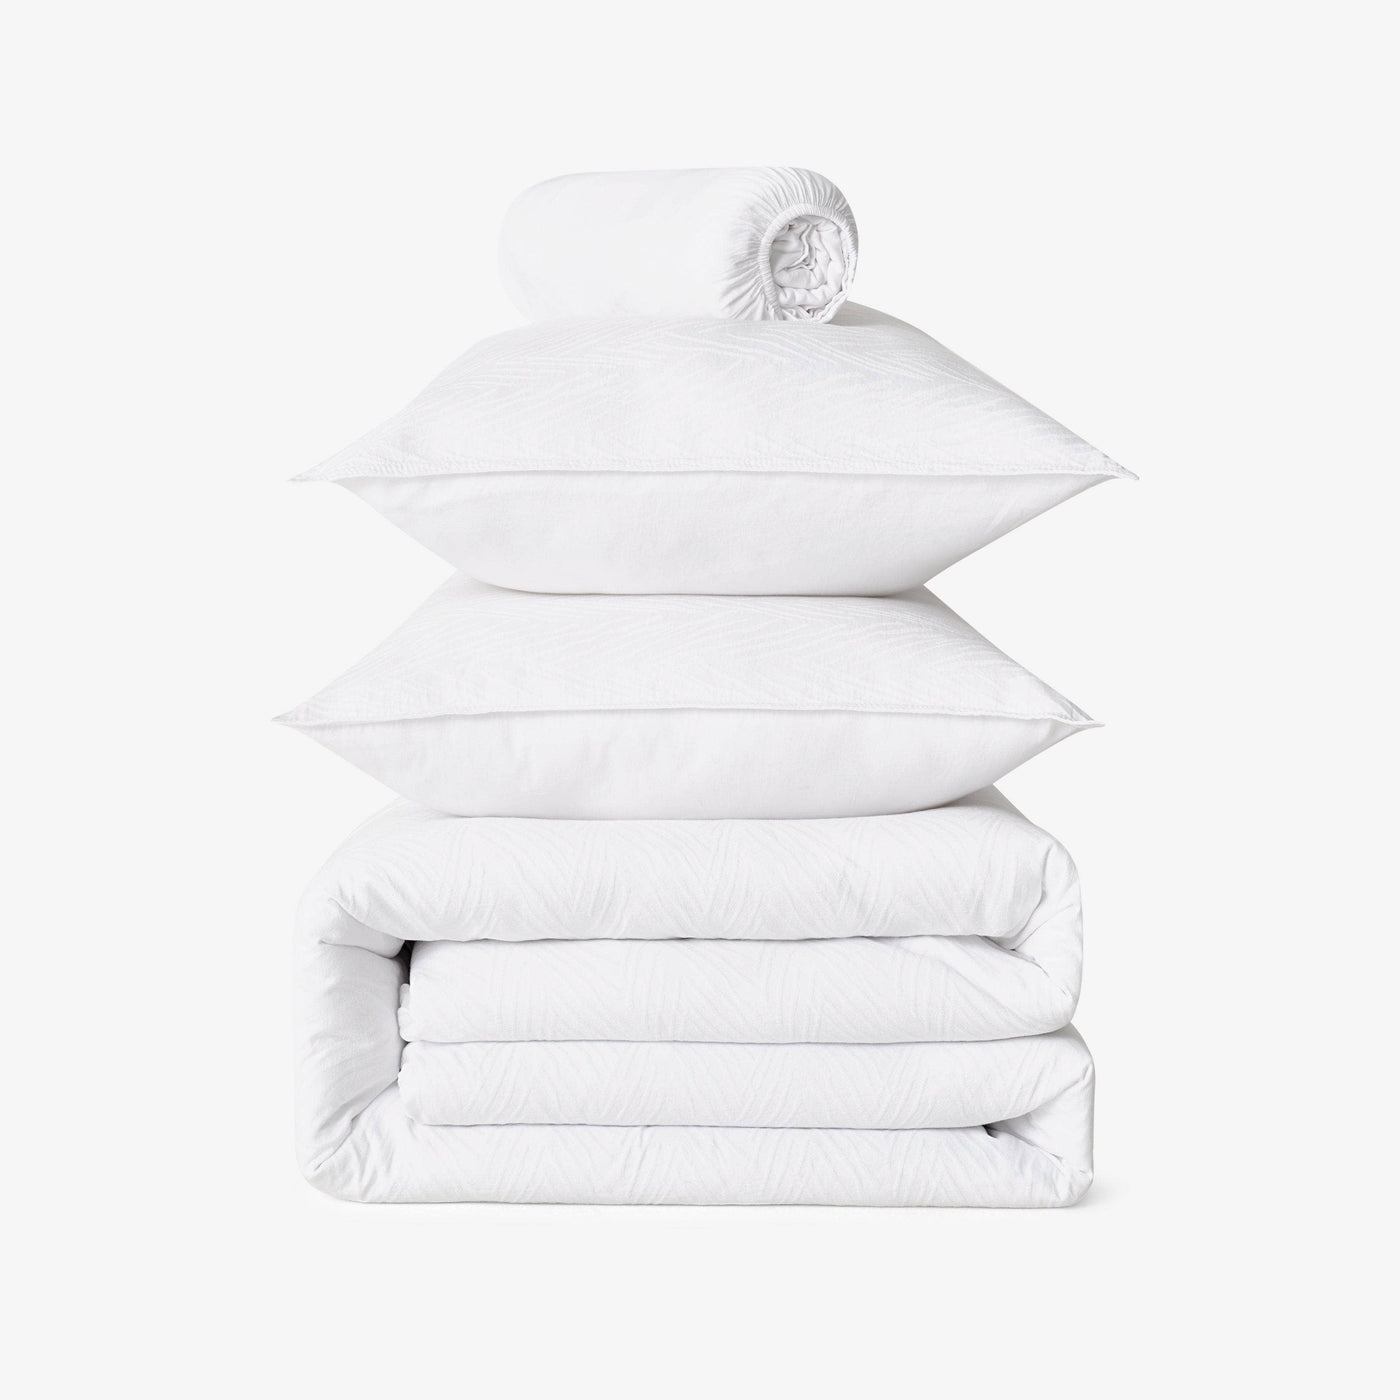 Freddie 100% Turkish Cotton Jacquard 300 TC Duvet Cover Set + Fitted Sheet, White, Double Size 2